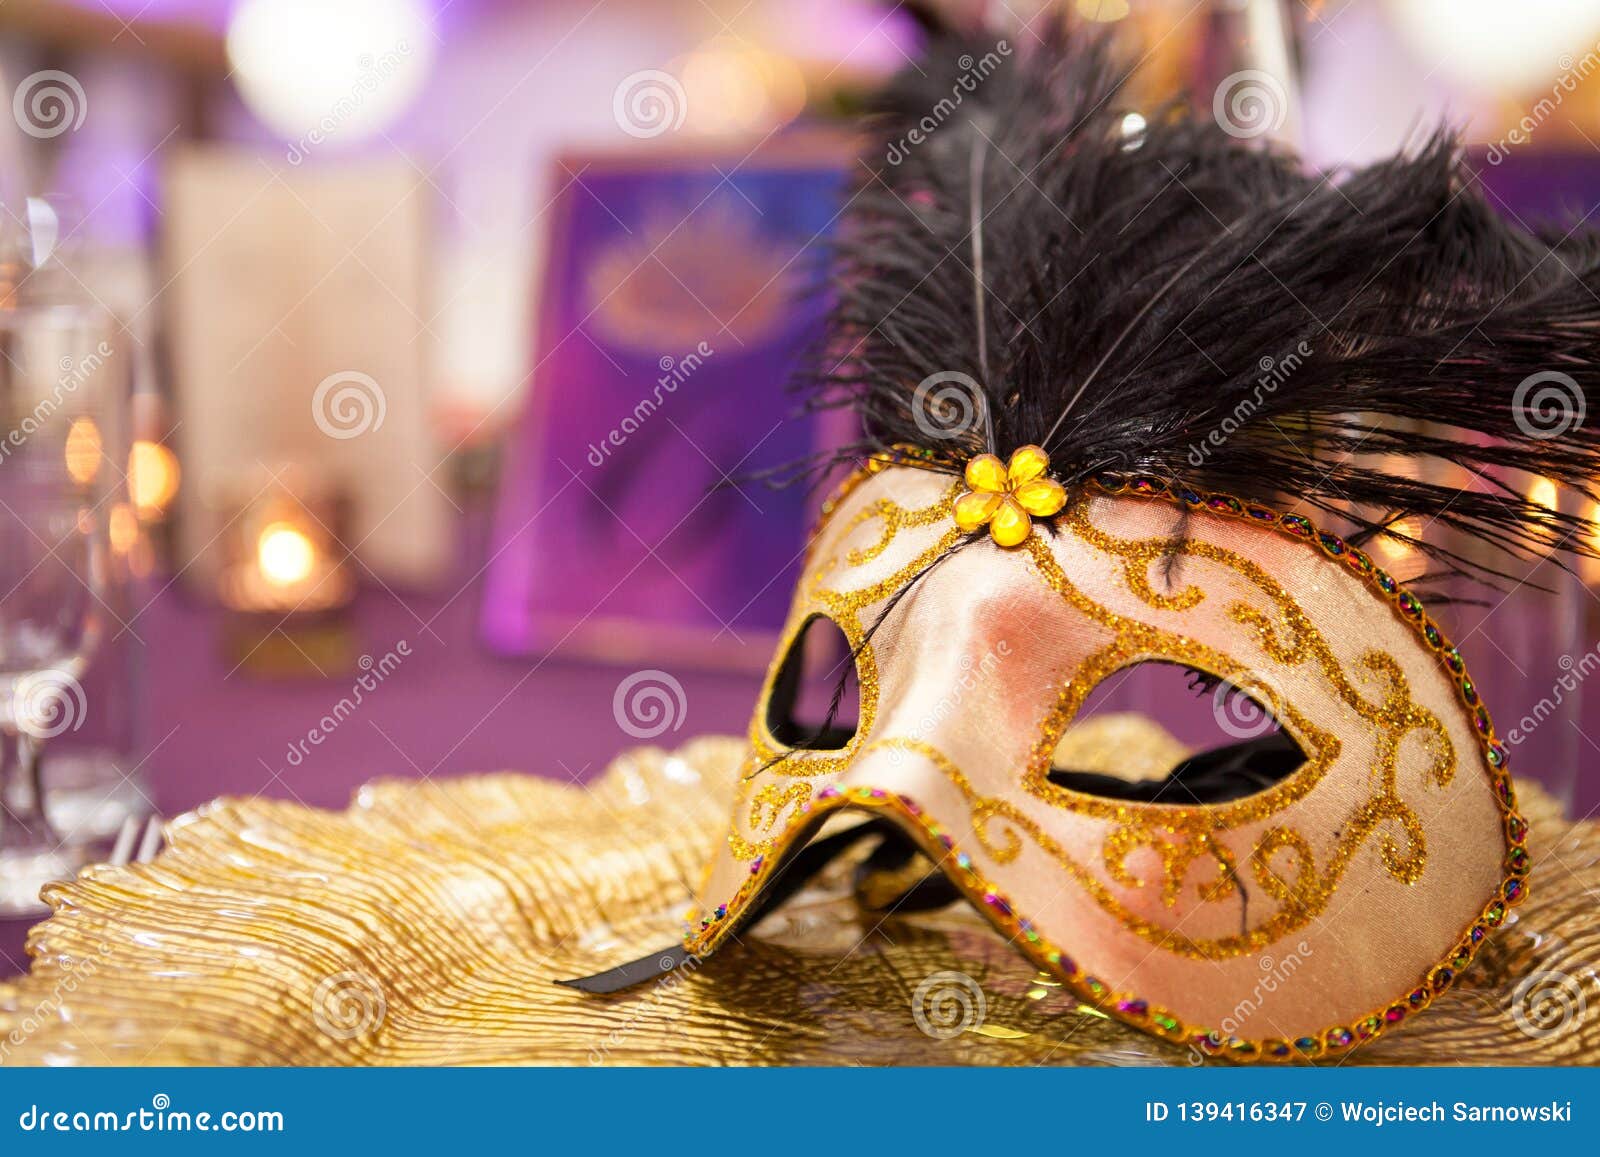 carnaval table with venetian mask on the plate